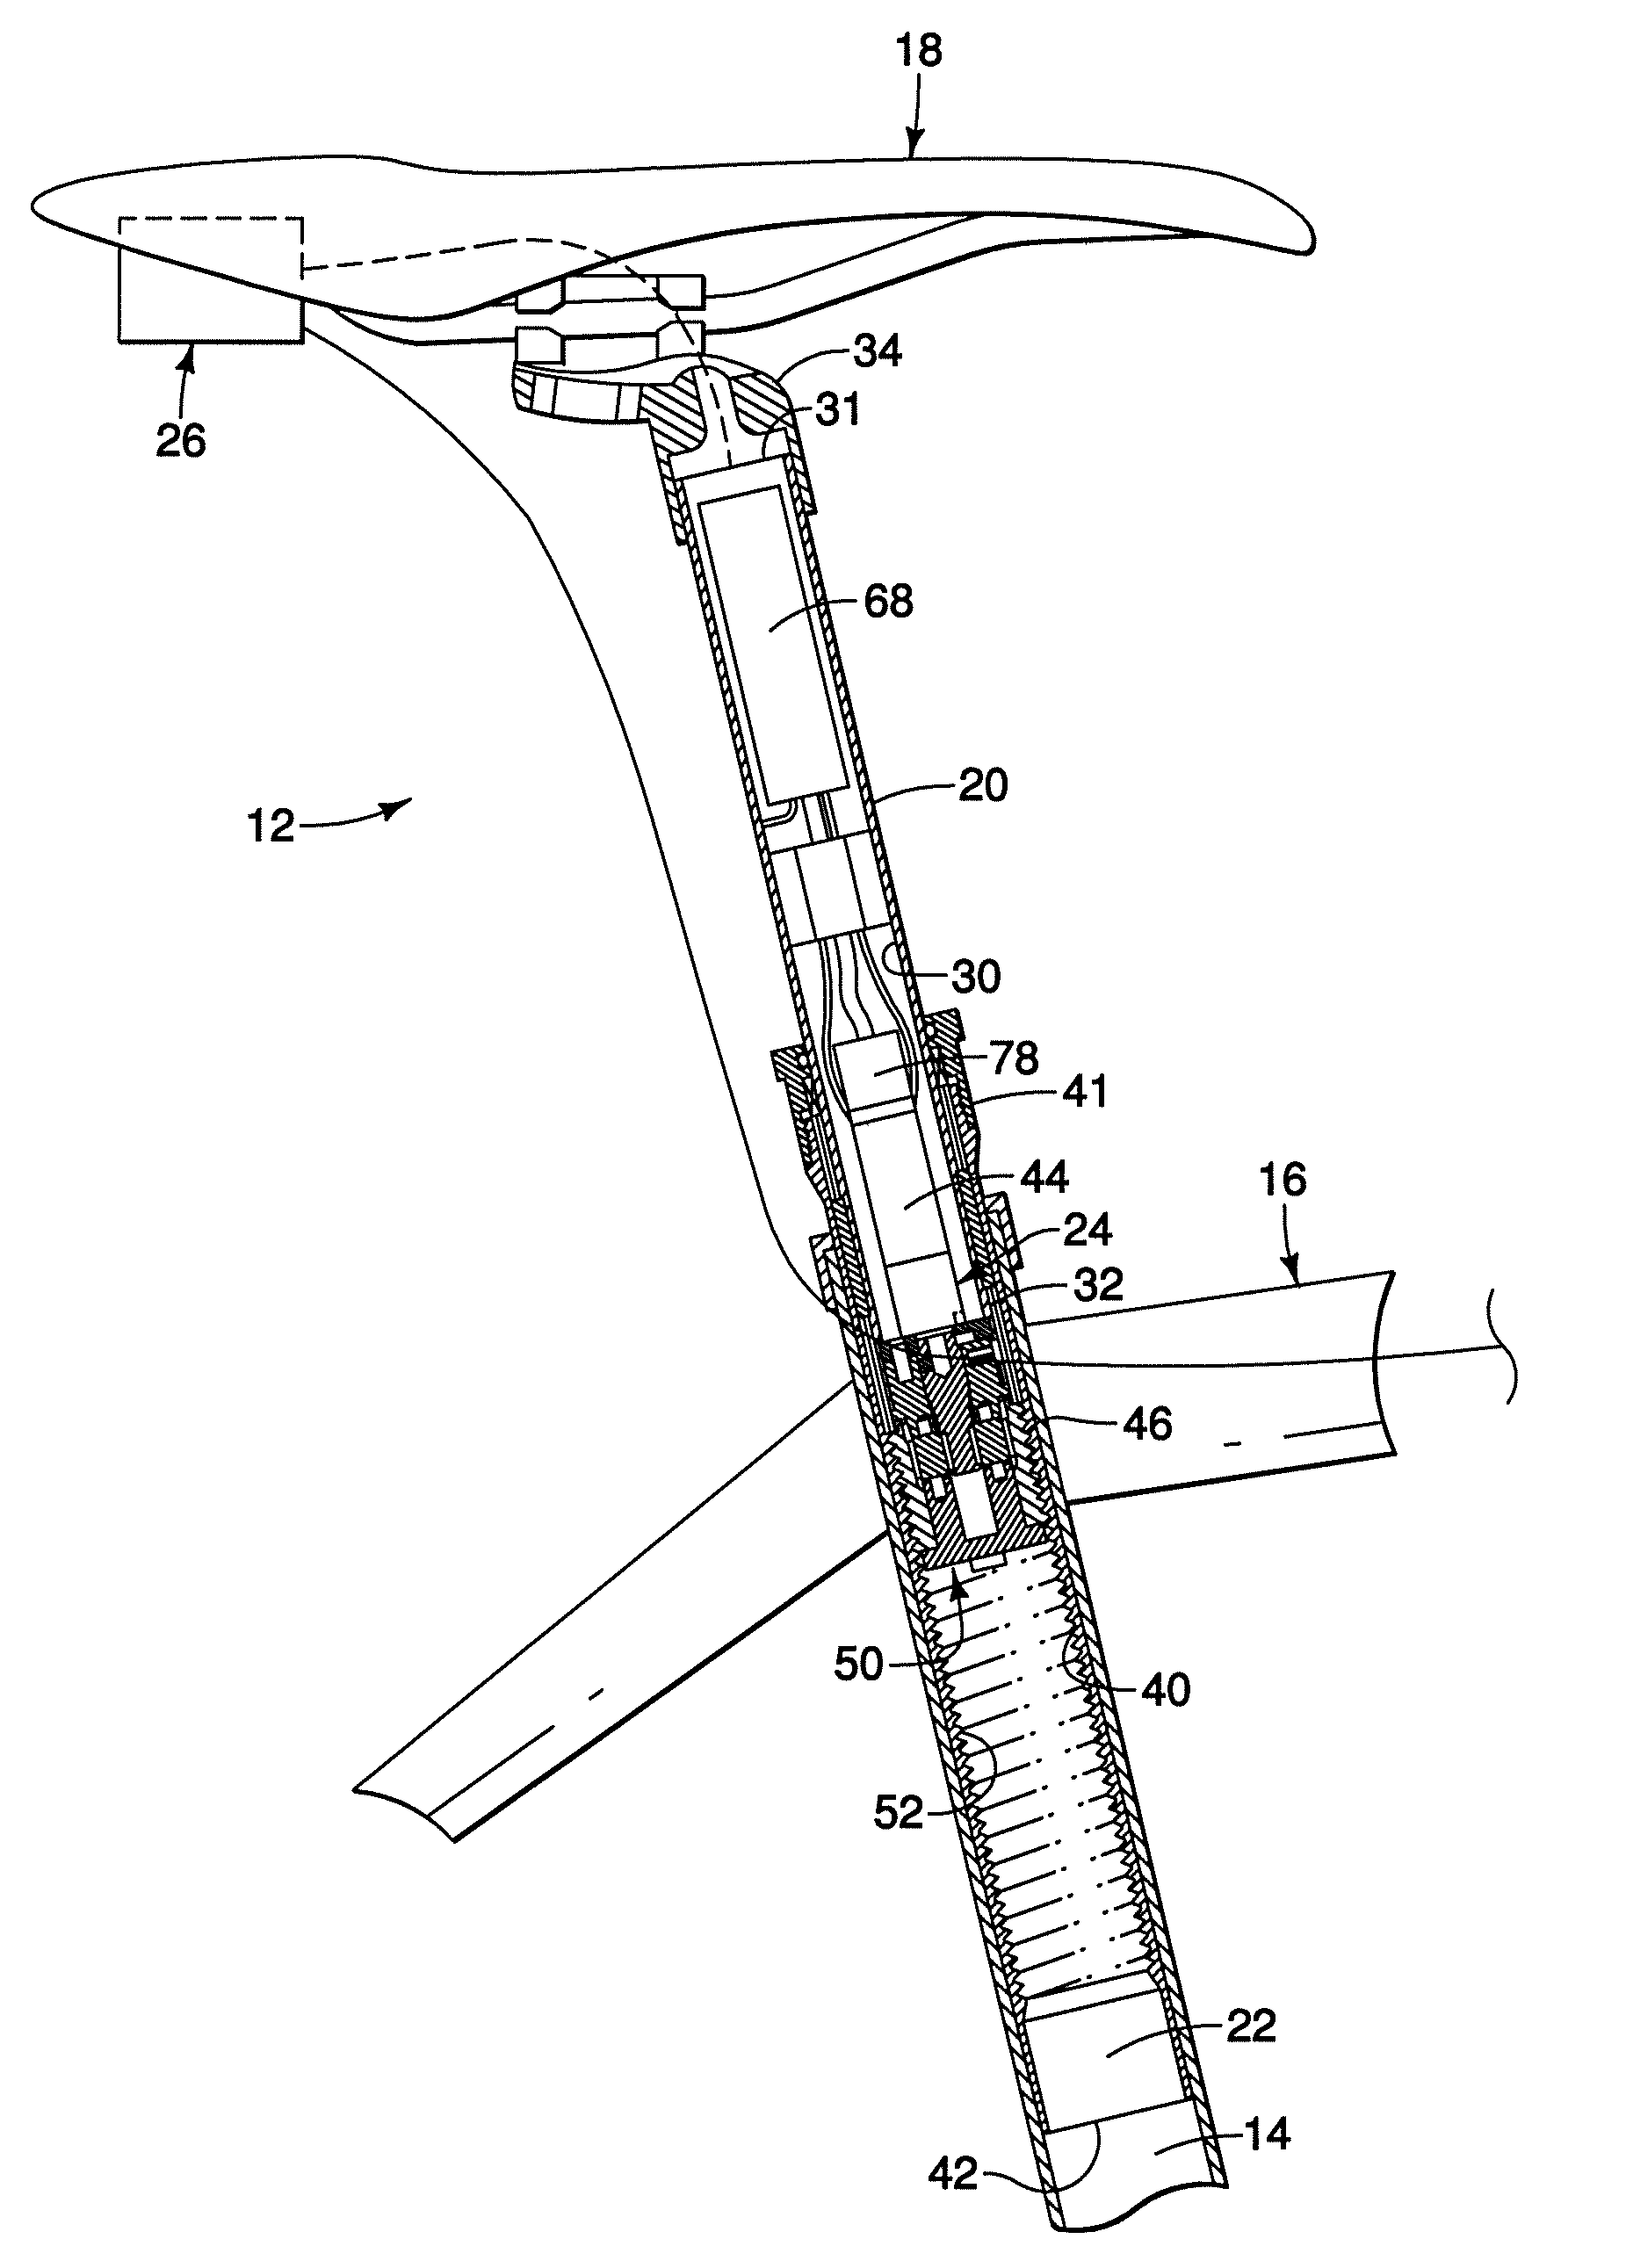 Motorized bicycle seatpost assembly